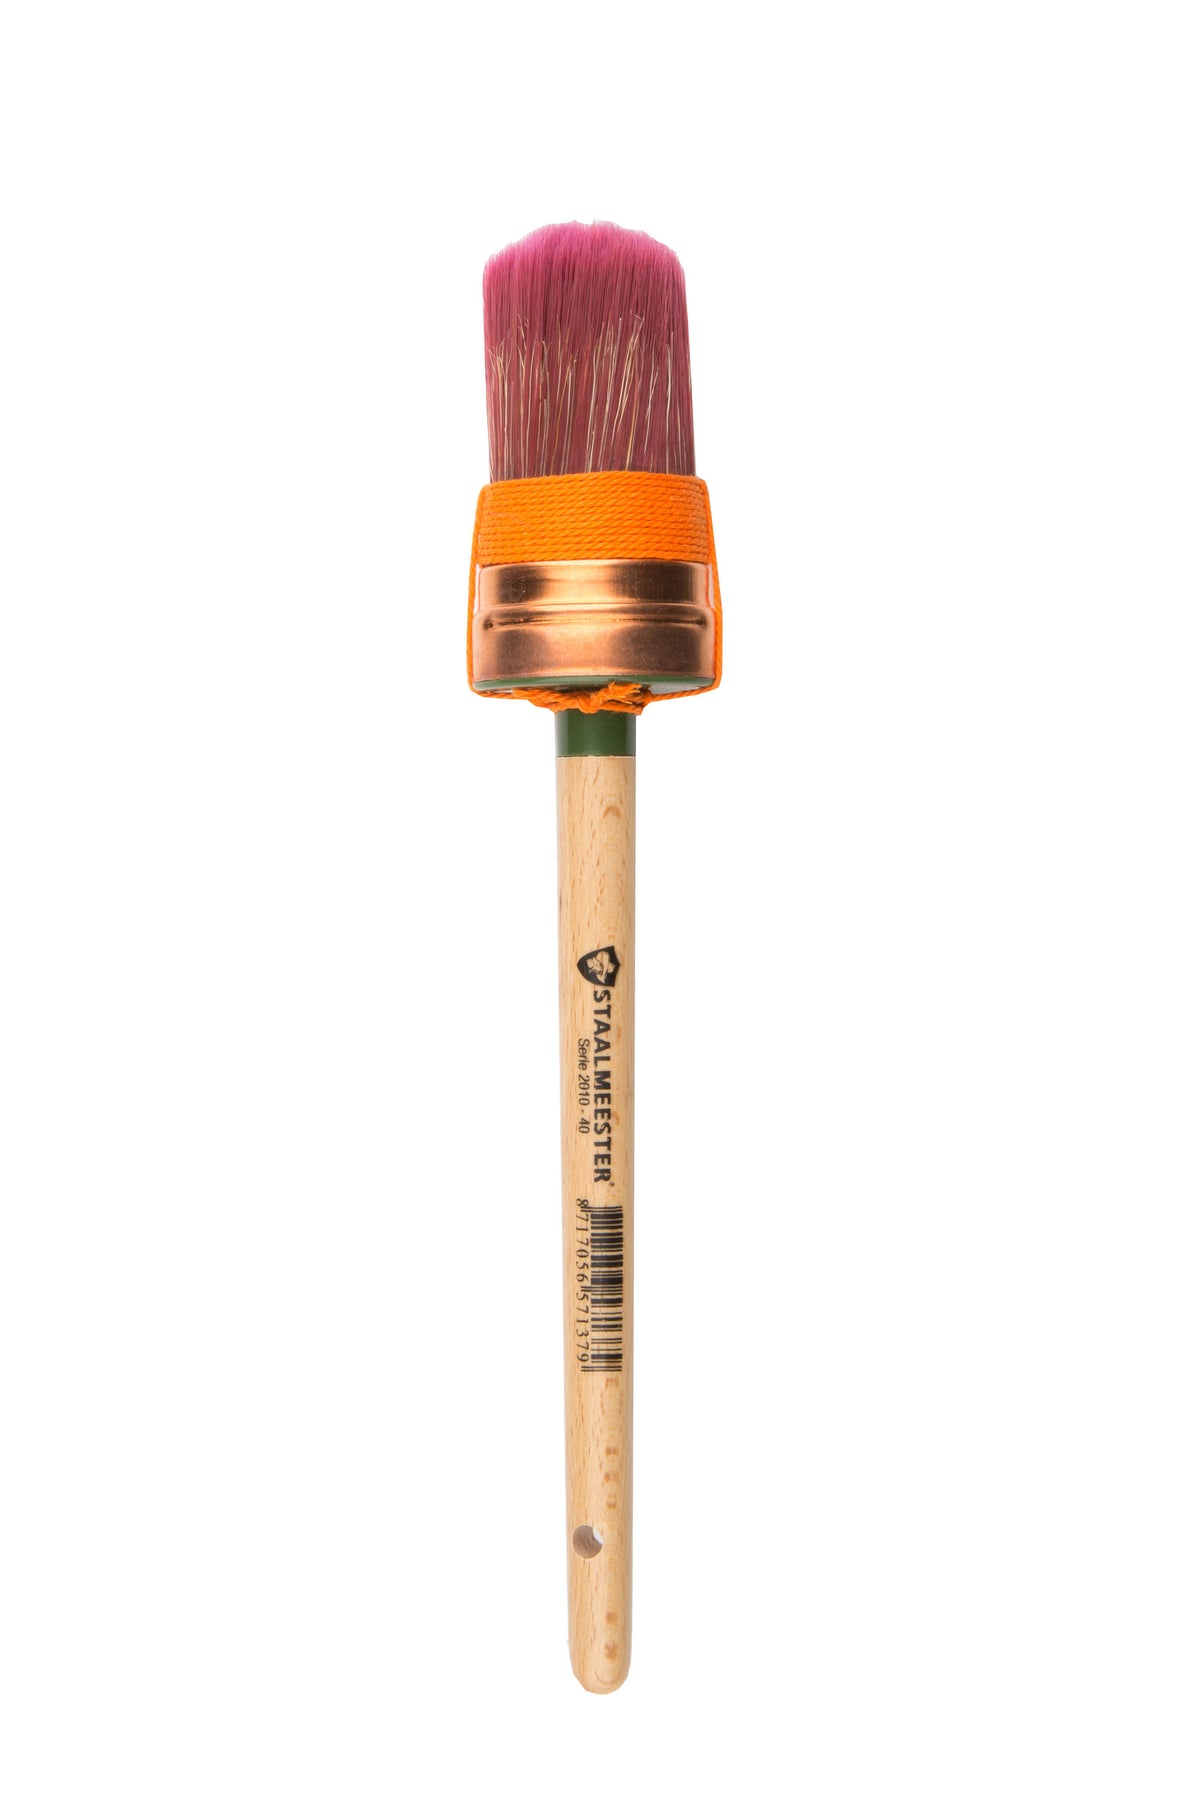 Staalmeester Brushes-Oval